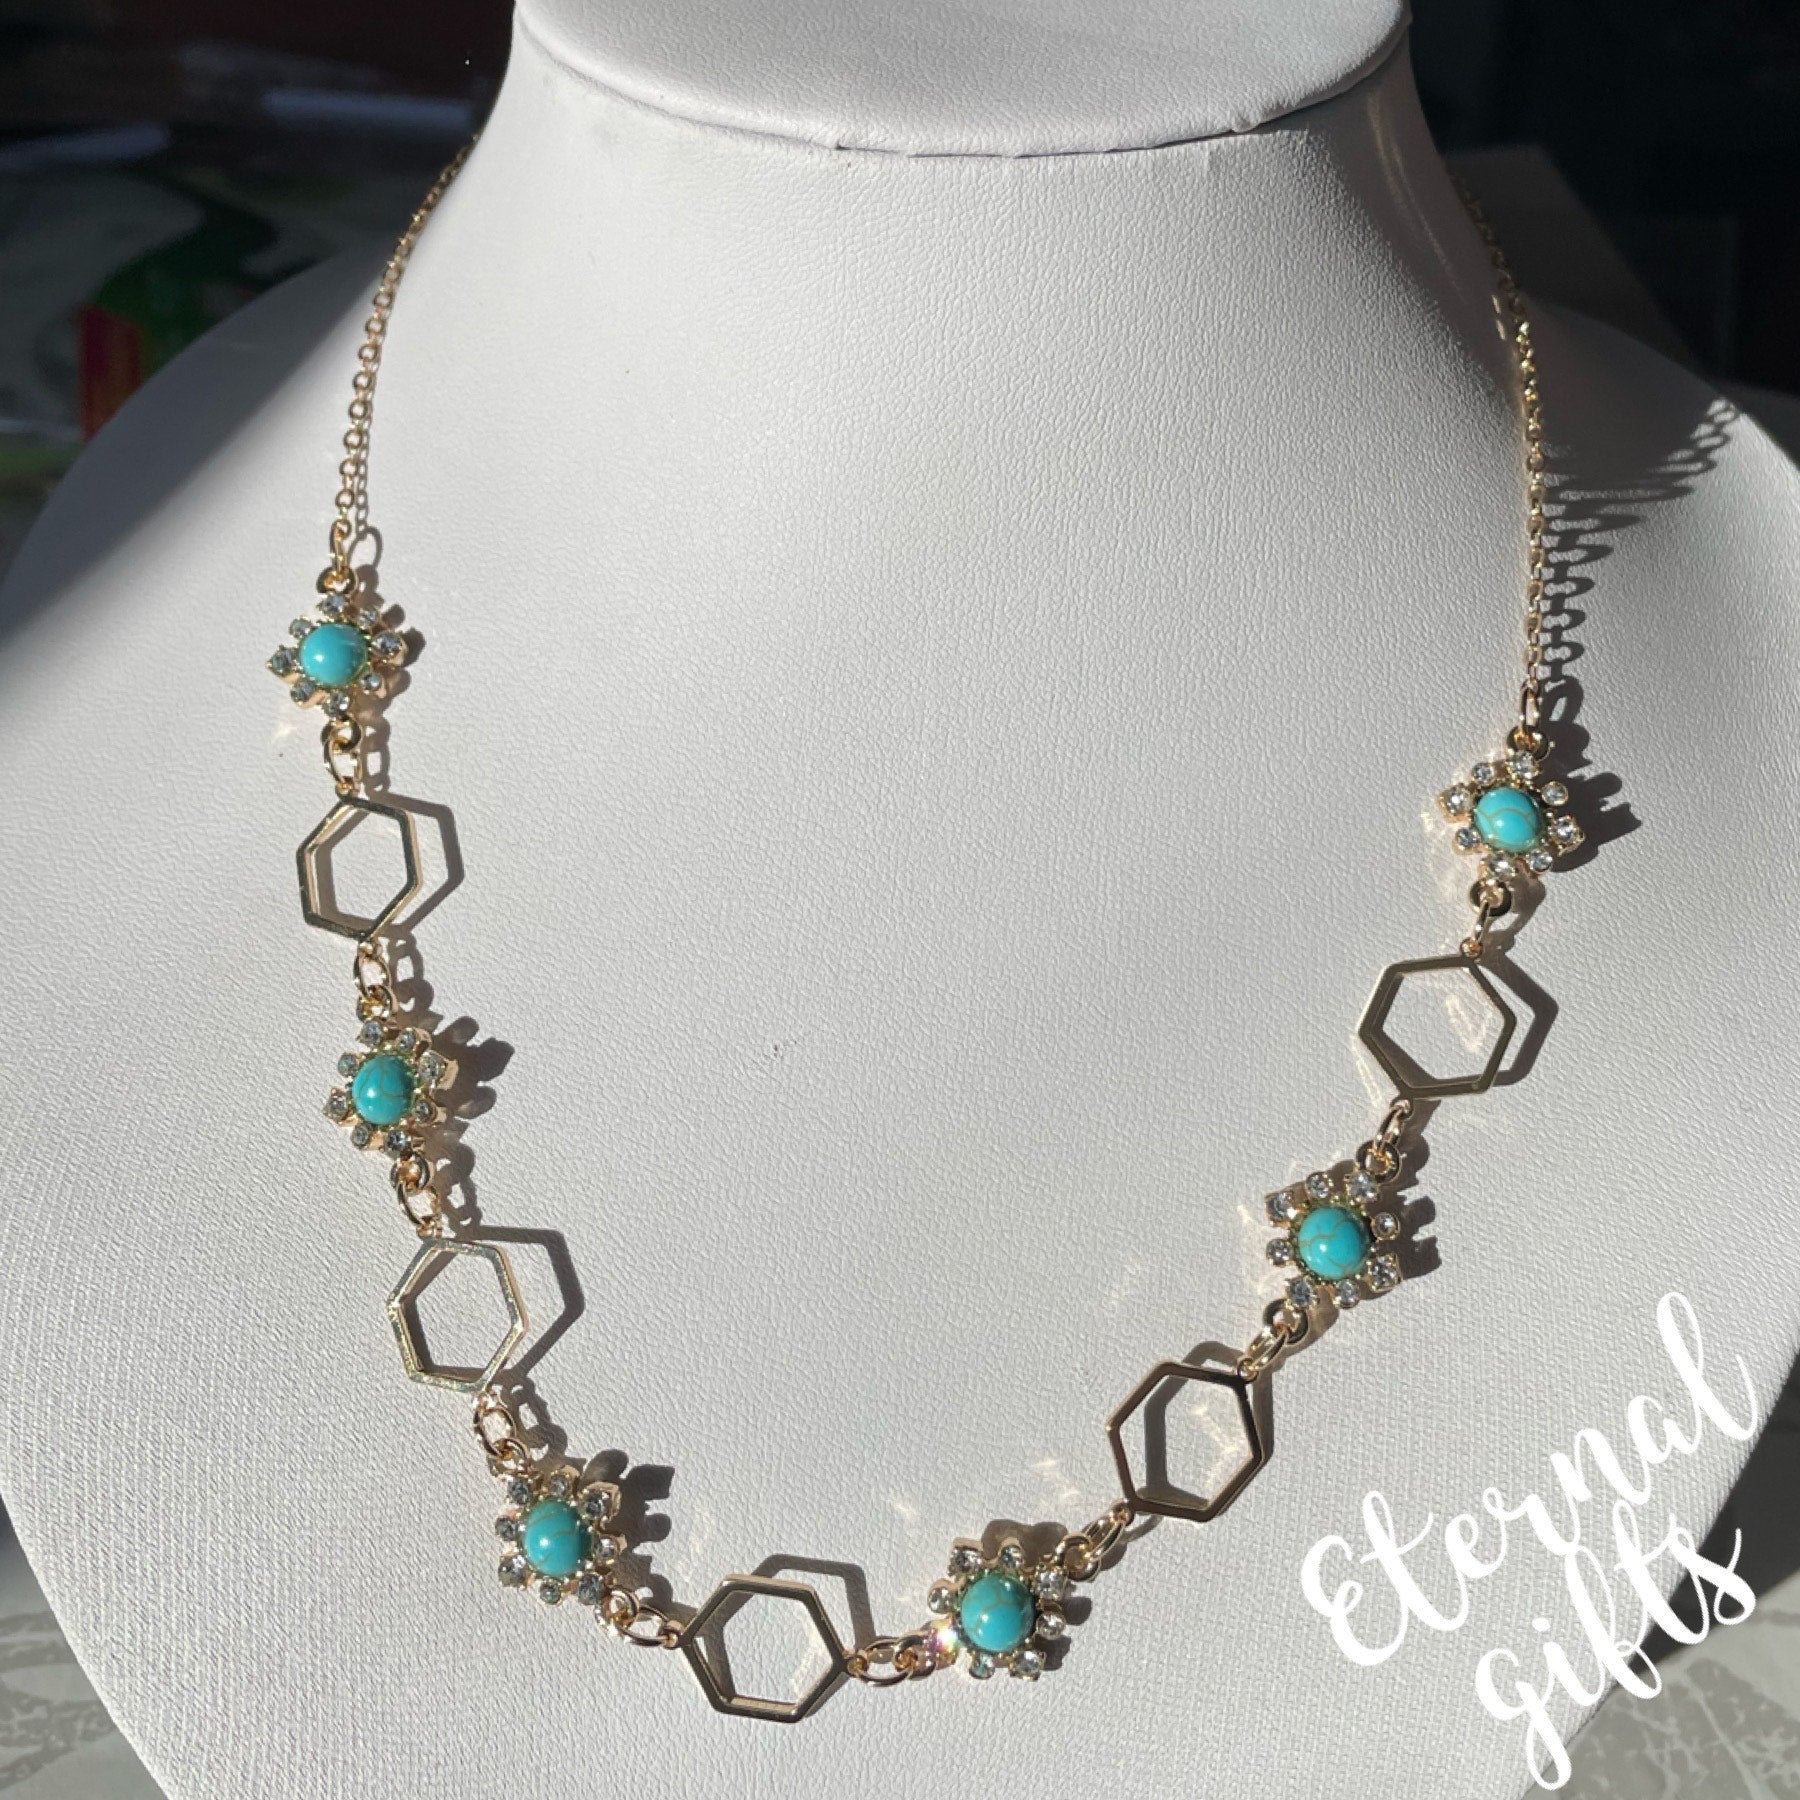 The Hexi Gold in Turquoise By Estela